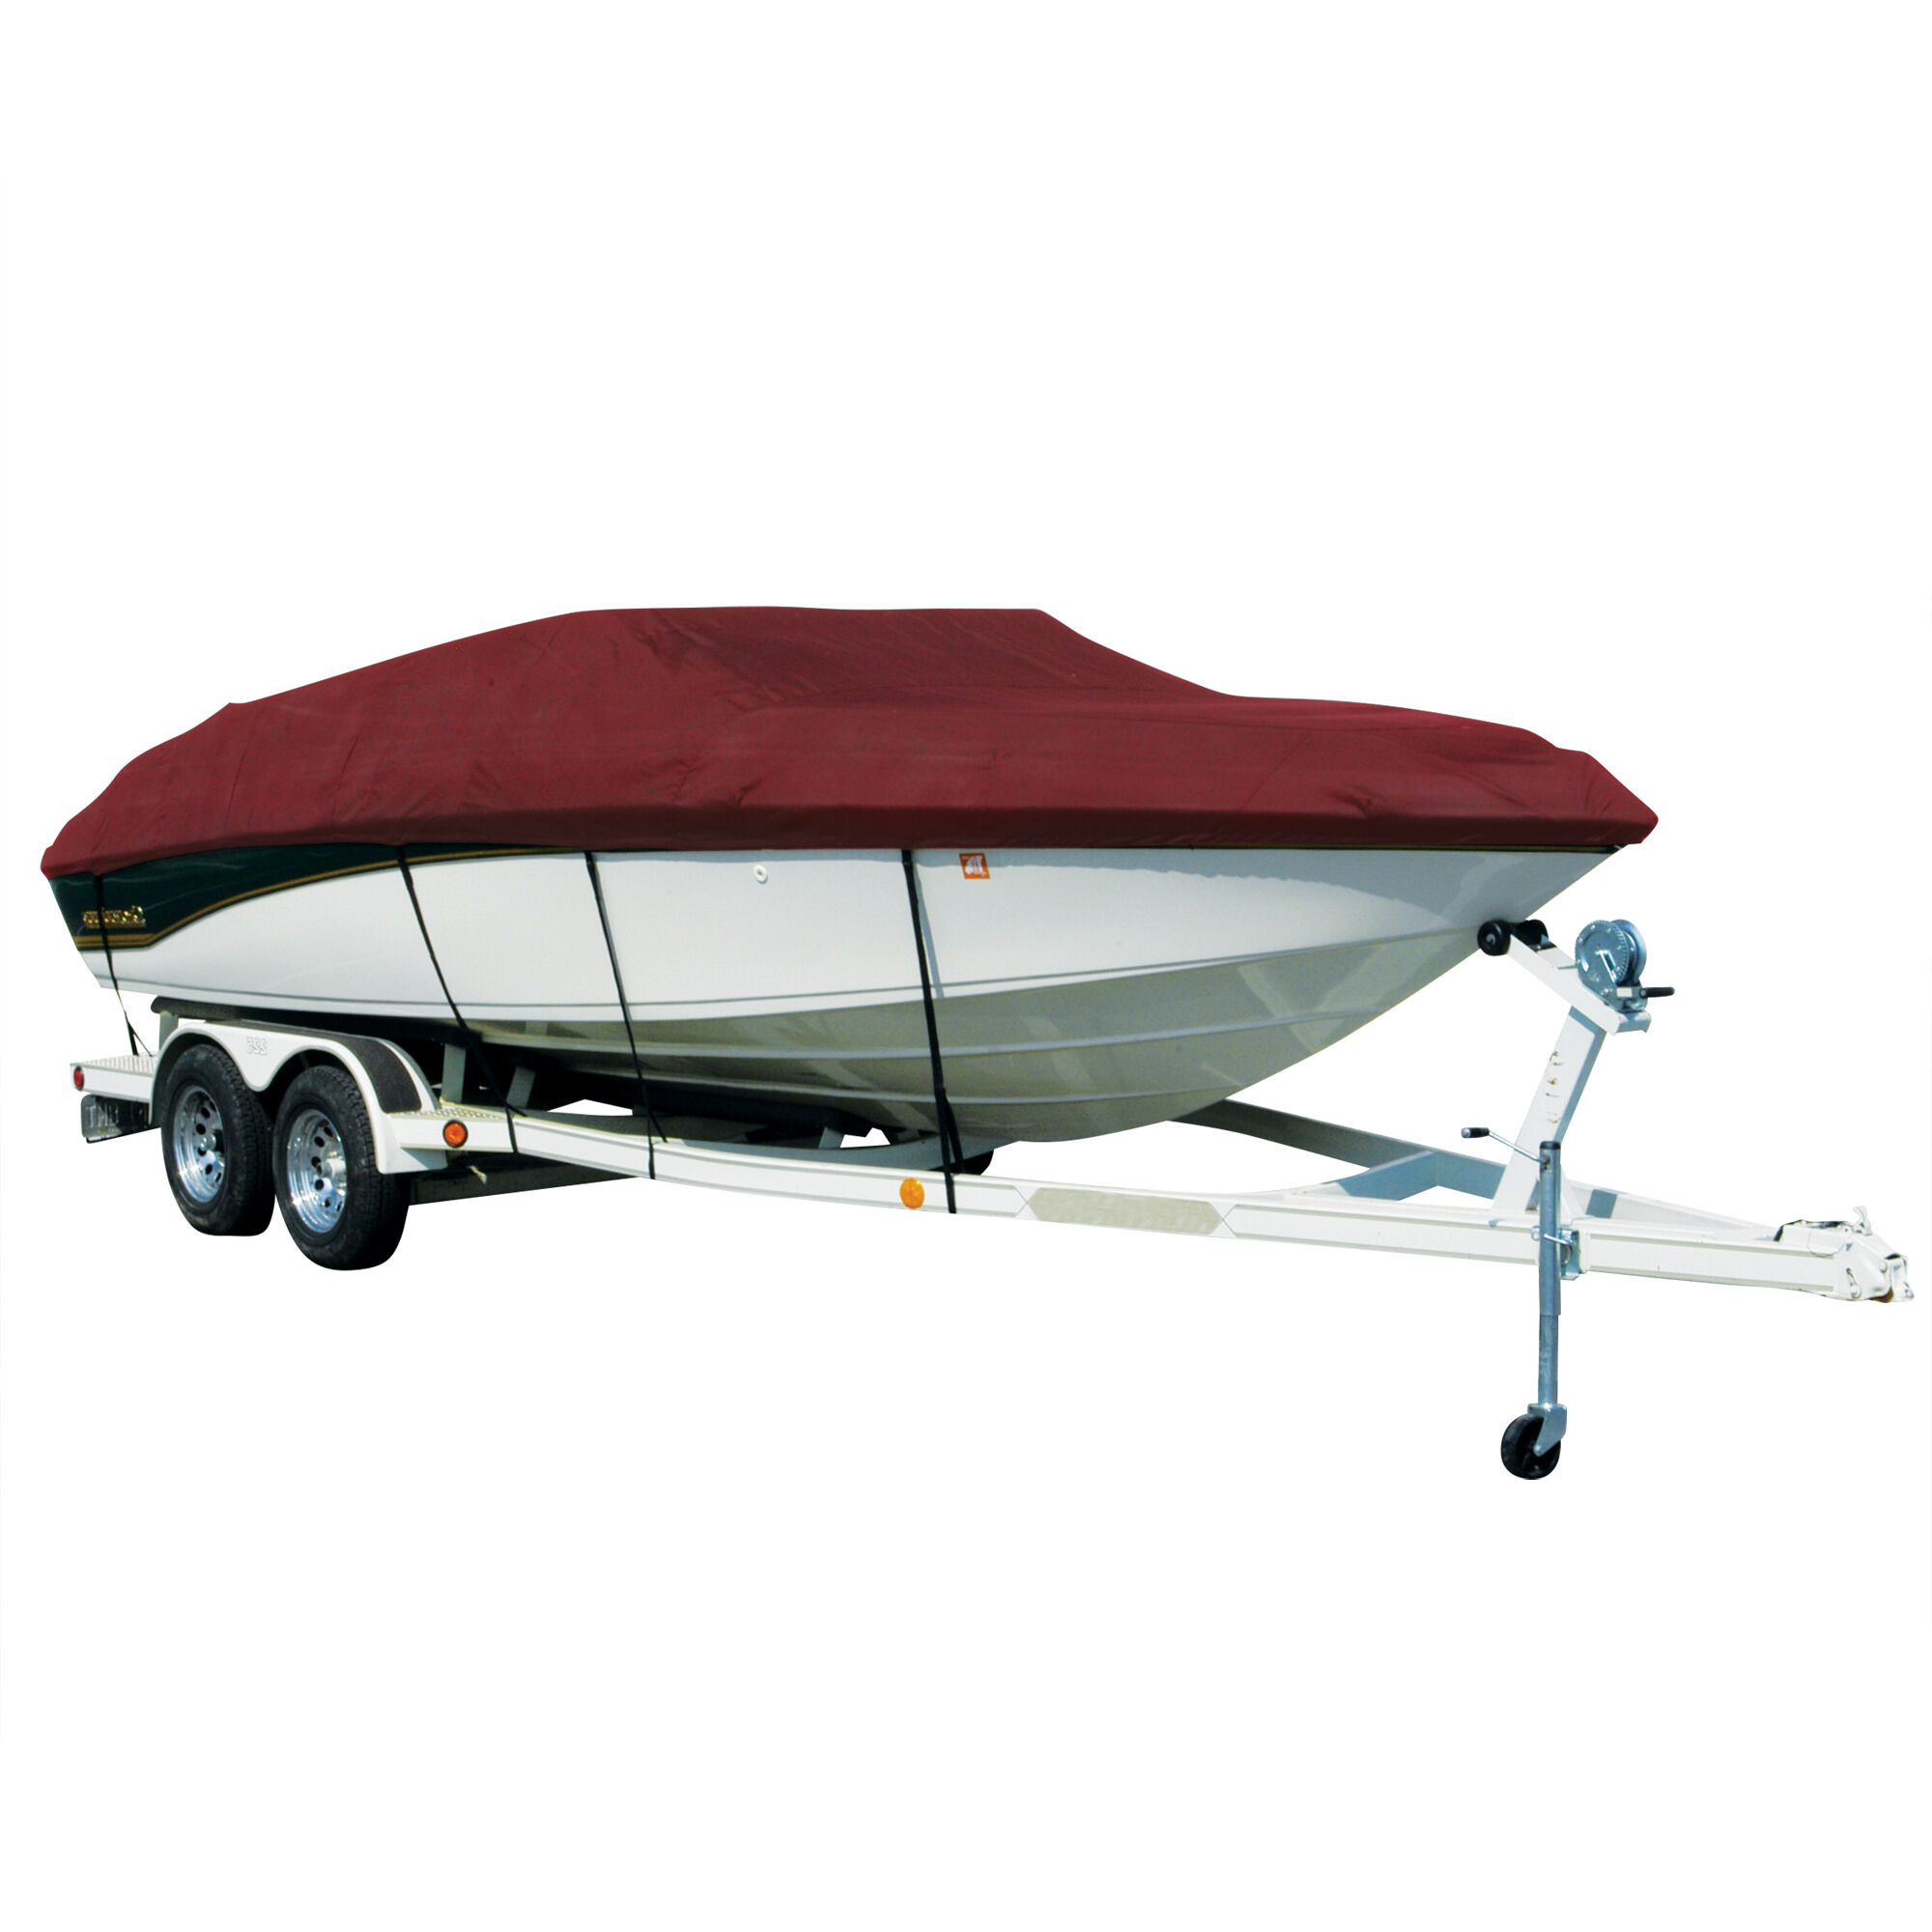 Covermate Hurricane Sharkskin Exact-Fit Nitro Boat Cover Fits 2004-2008 Nitro NX 750 DC Outboard w/ Port Trolling Motor in Burgundy